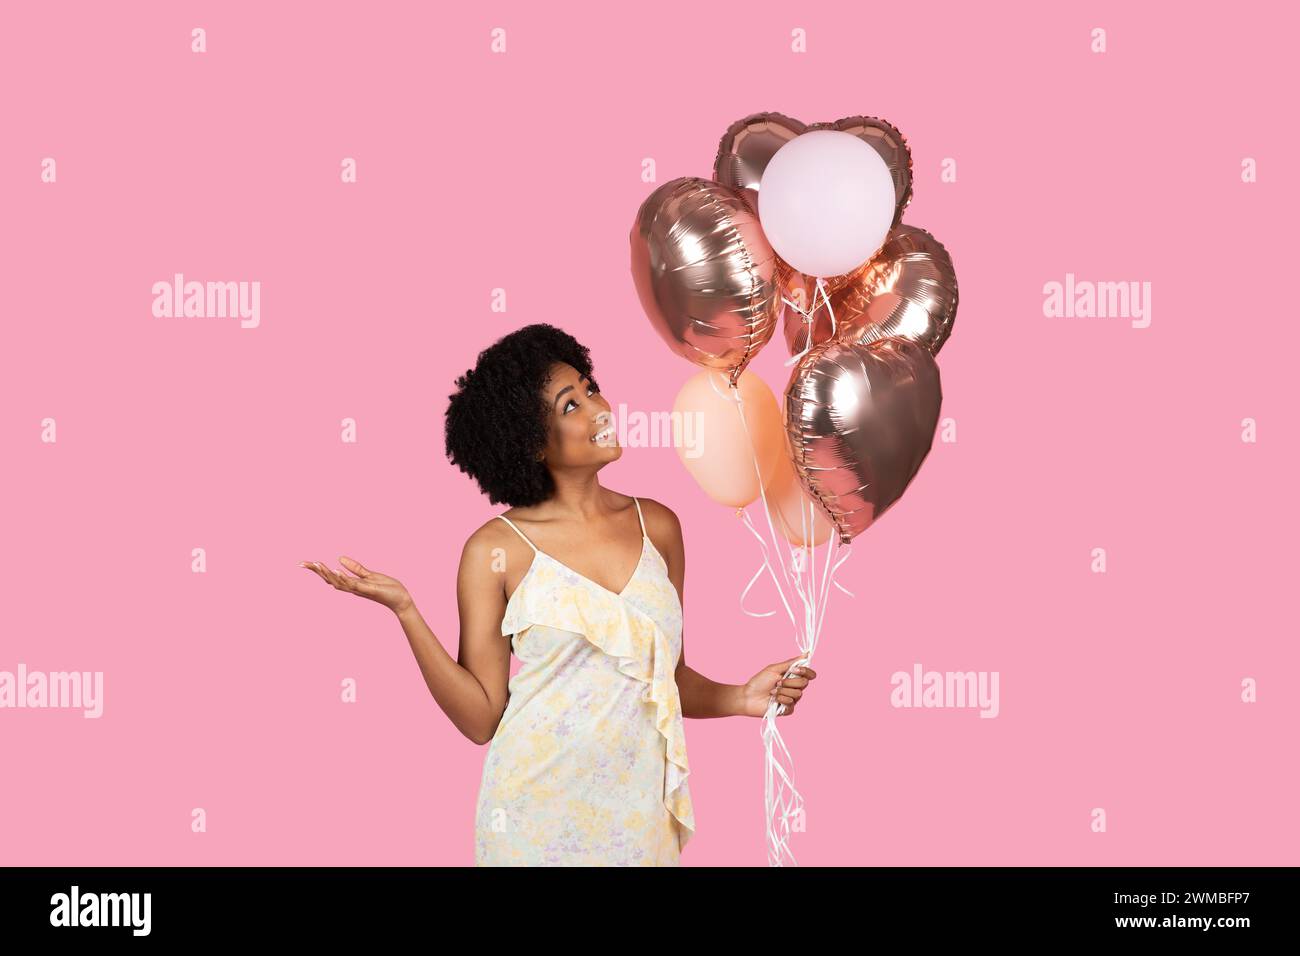 Cheerful African American woman with curly hair, looking up at rose gold and white balloons in her hand Stock Photo